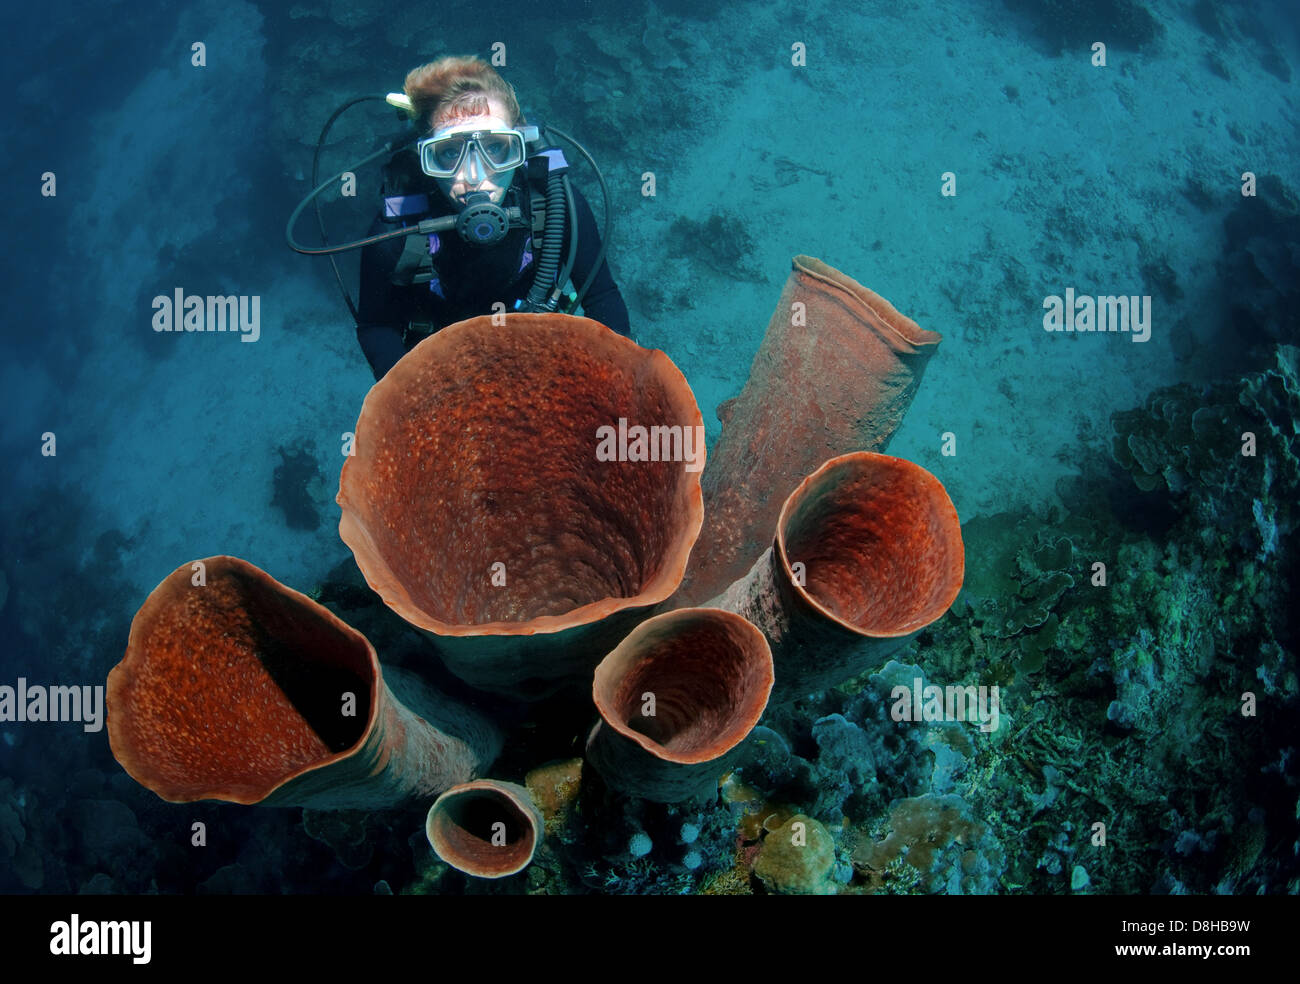 Tube sponges and diver Stock Photo